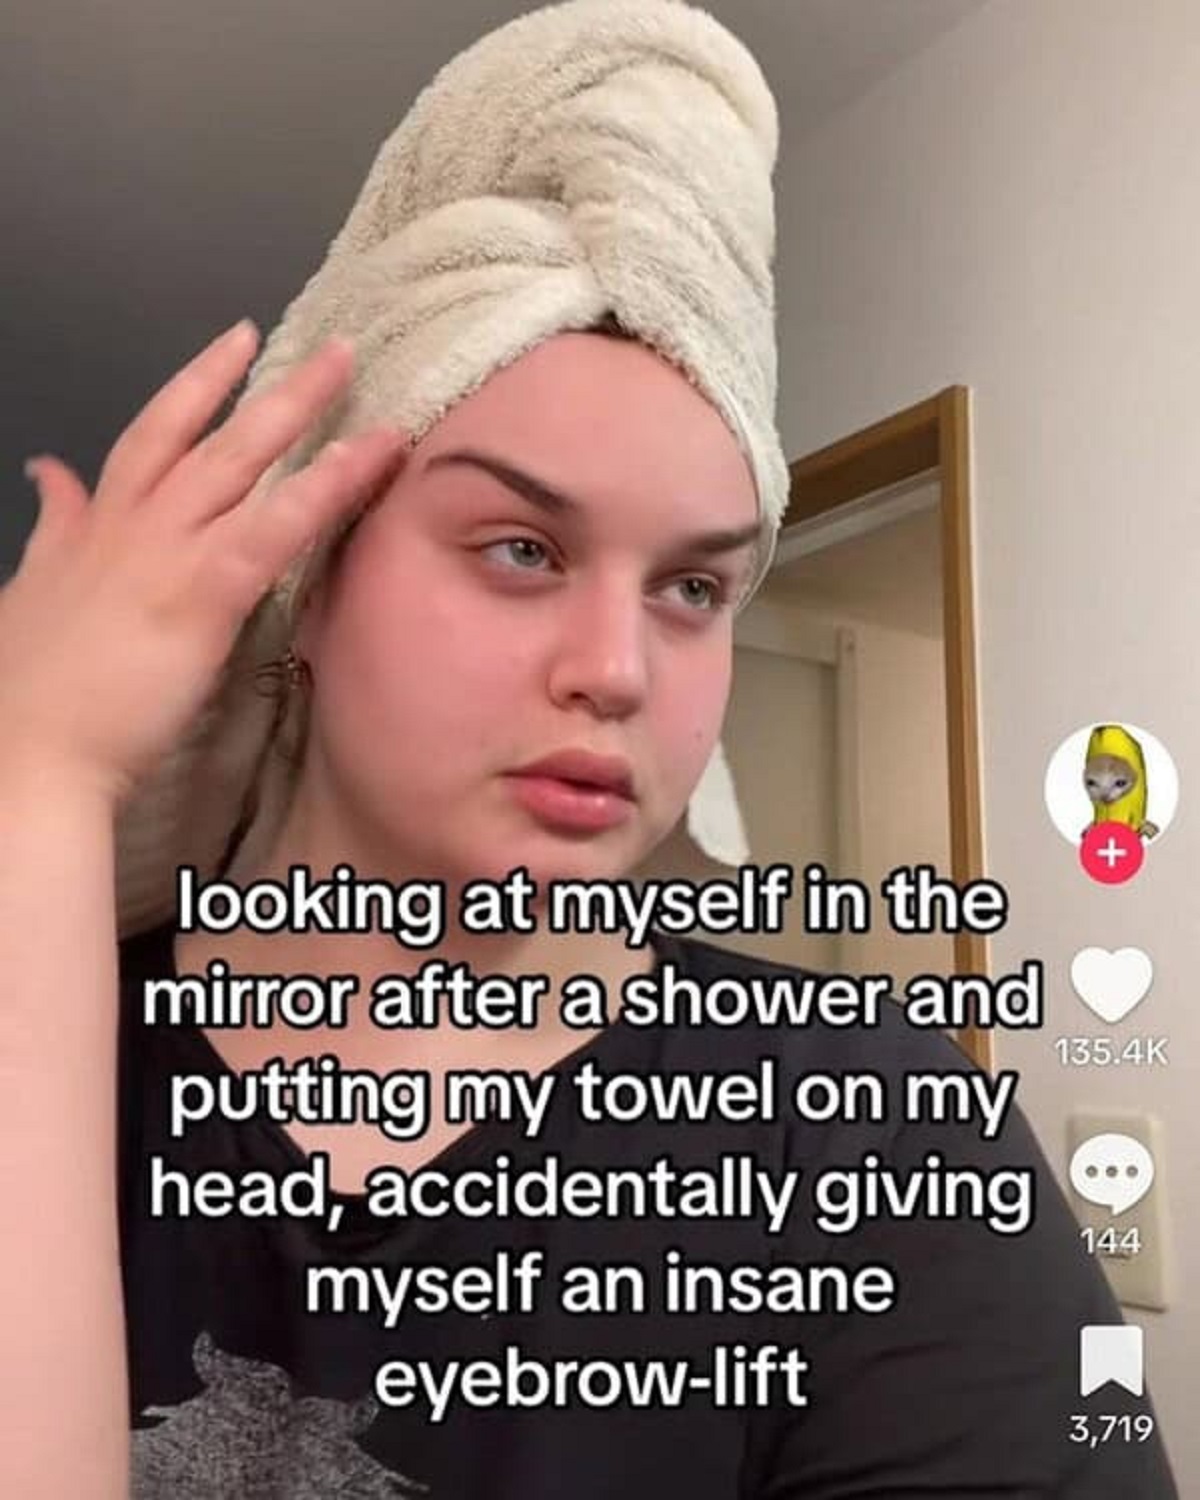 photo caption - looking at myself in the mirror after a shower and putting my towel on my head, accidentally giving myself an insane eyebrowlift 144 3,719